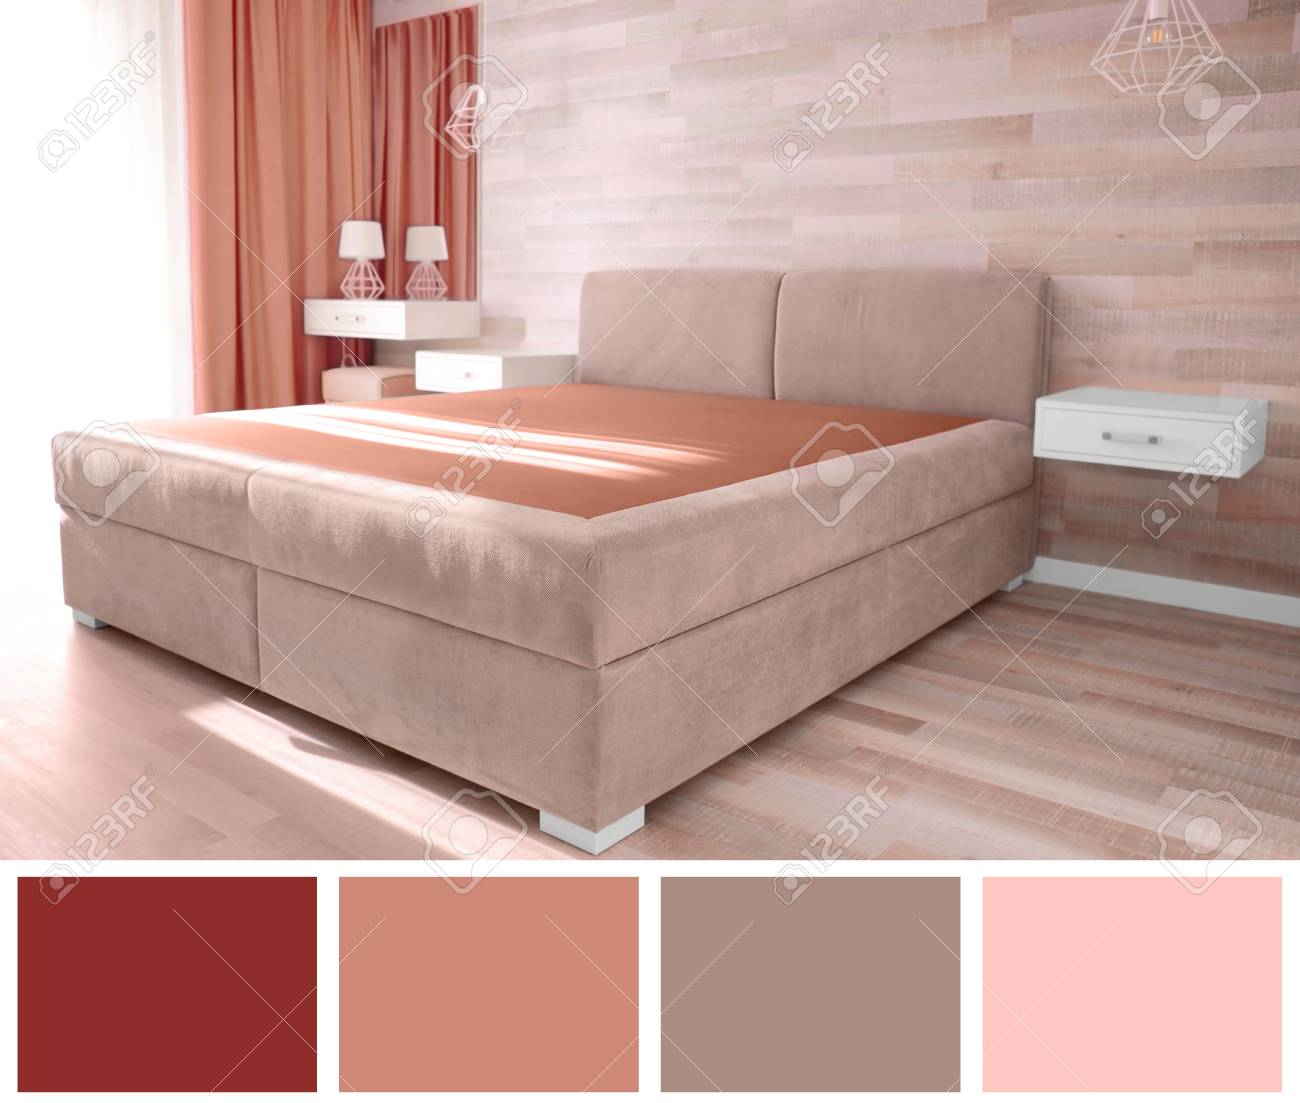 Modern Interior Of Bedroom And Palette With Salmon Color Stock Photo regarding size 1300 X 1103